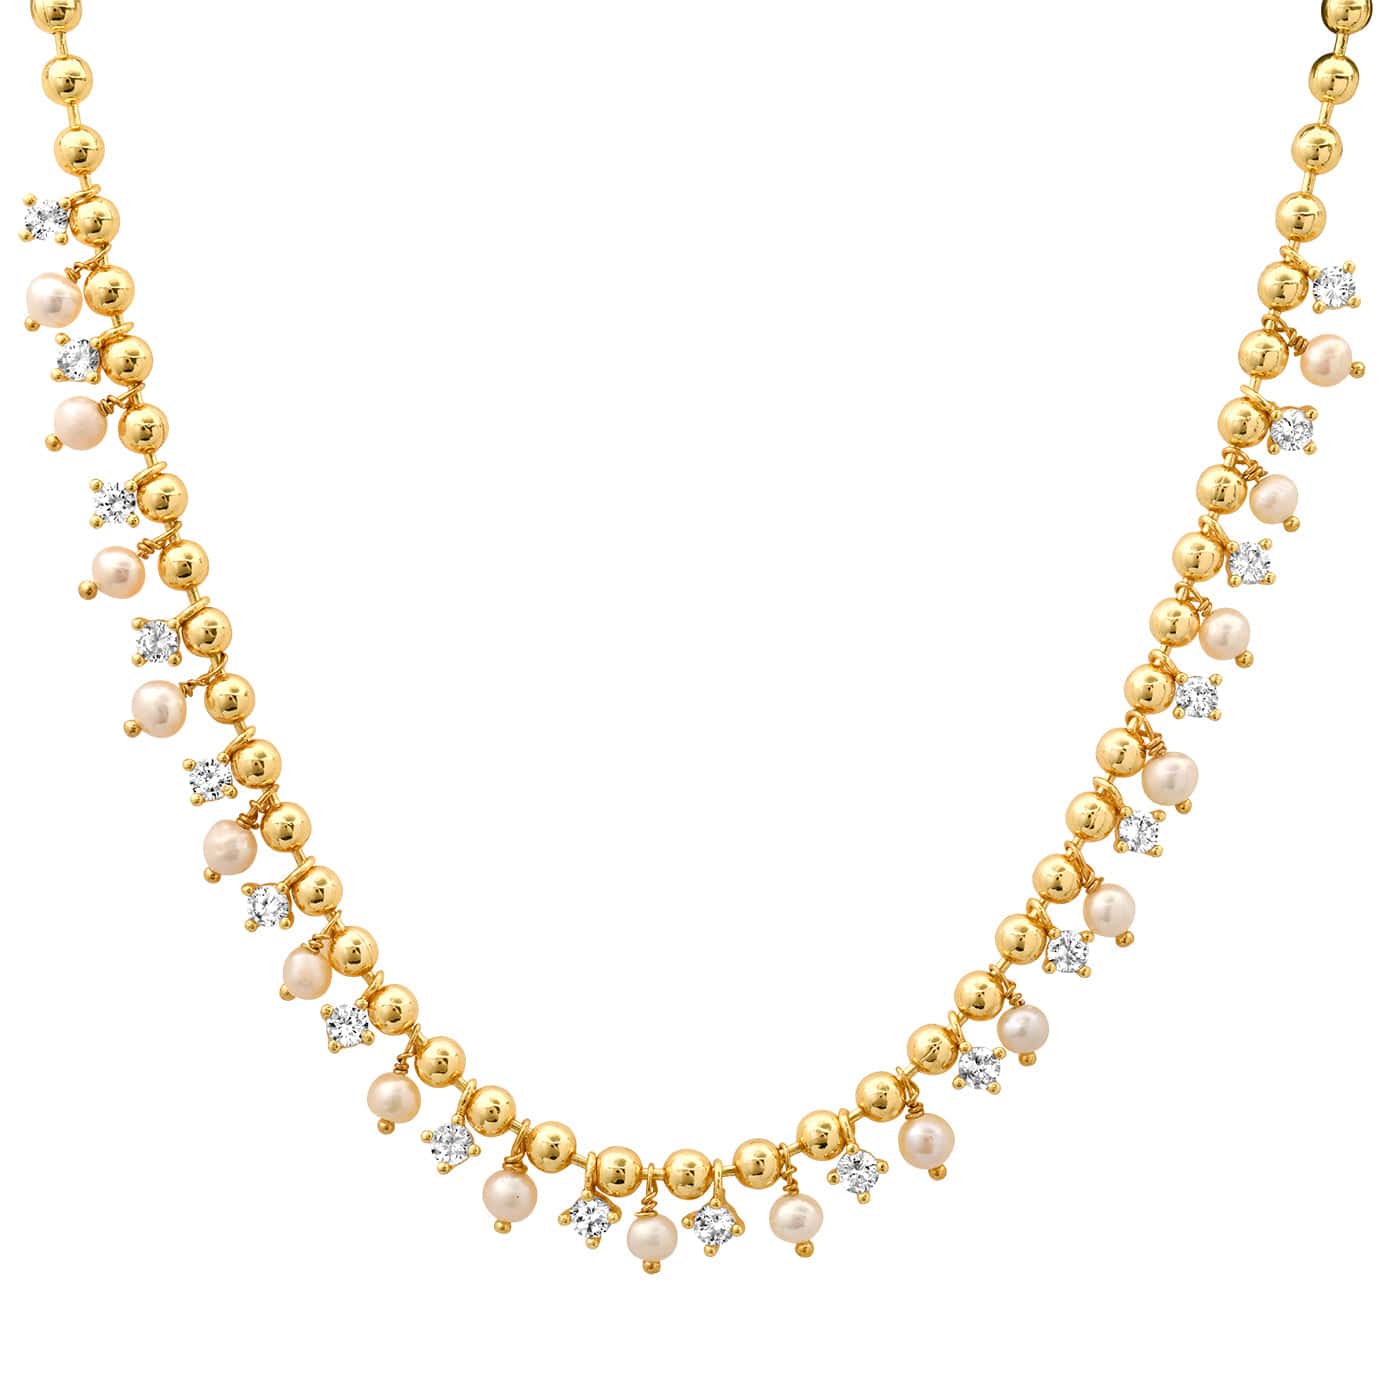 TAI JEWELRY Gold Ball Necklace with Alternating CZ and Pearl Stones